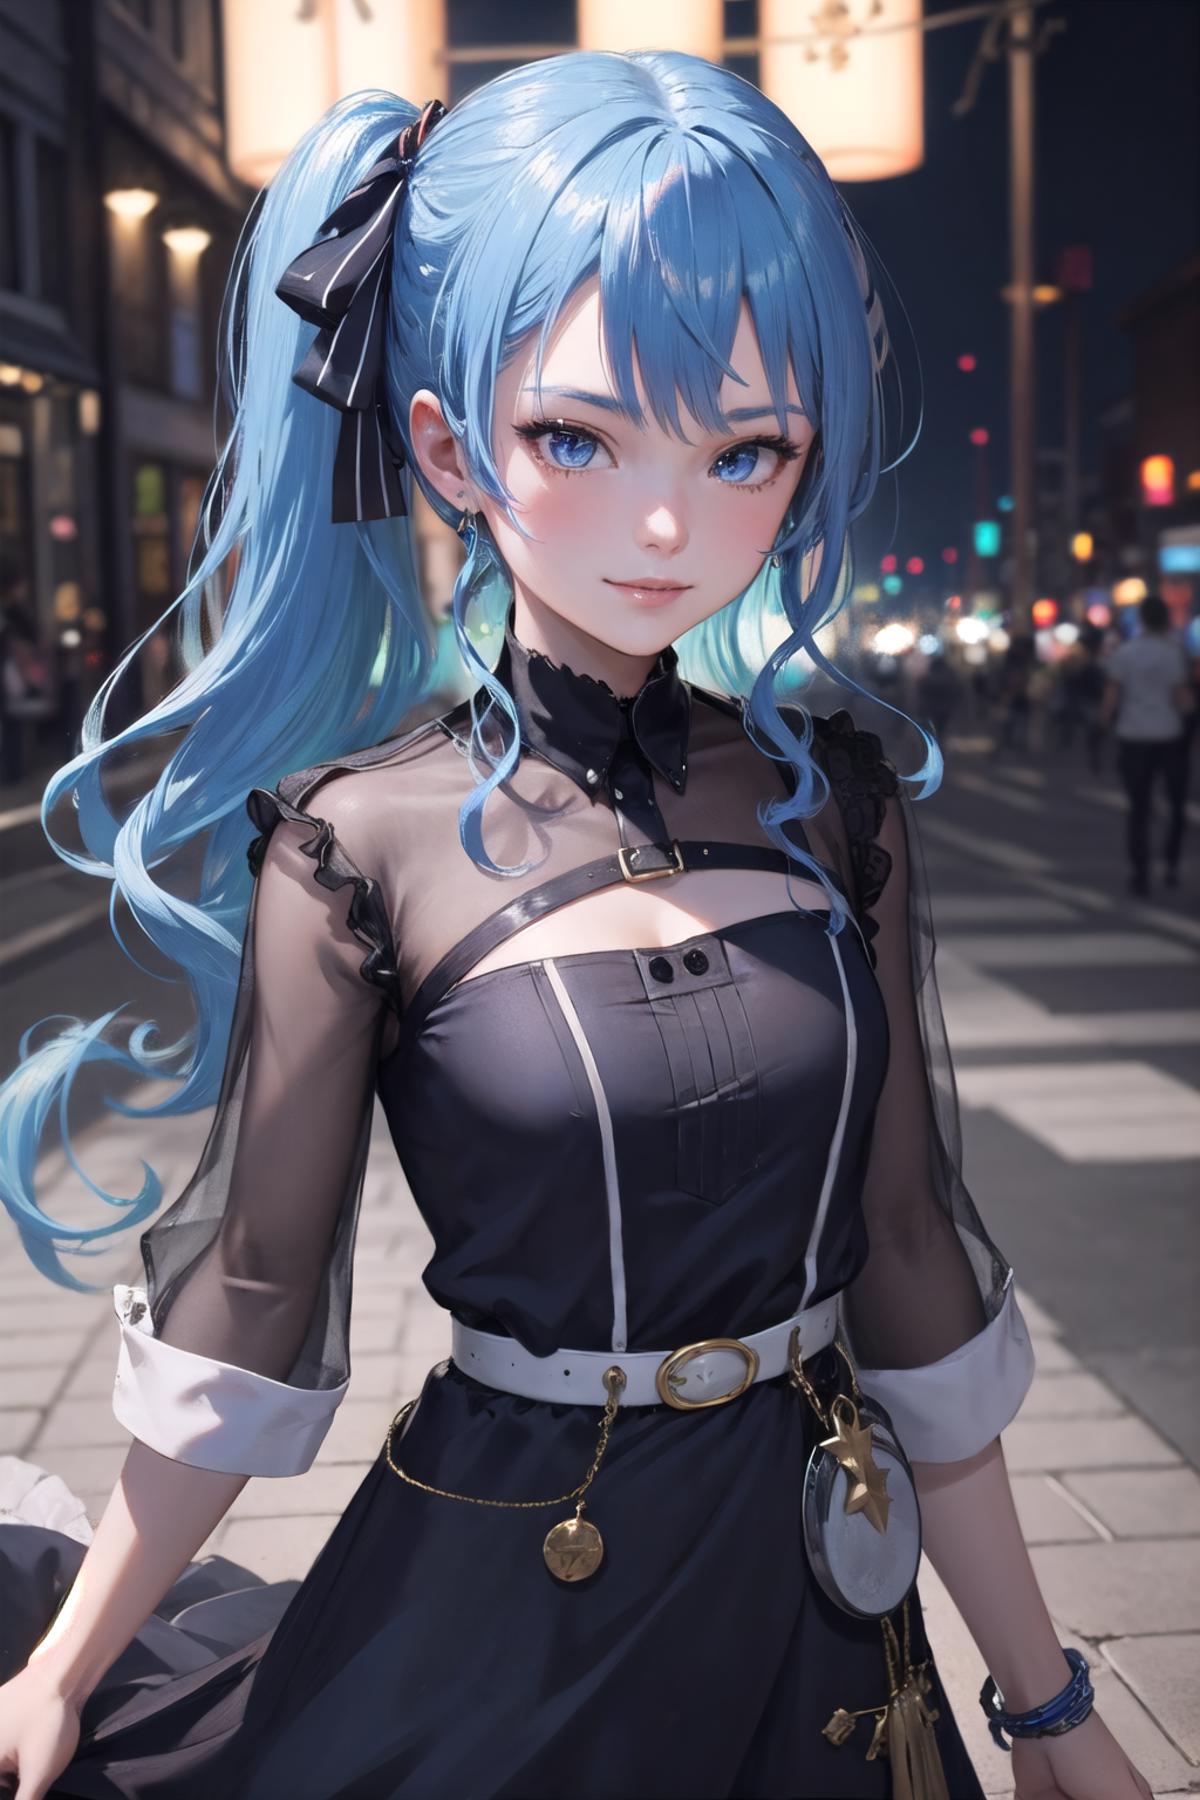 Hoshimachi Suisei (8+ Outfits) | Hololive image by wrench1815